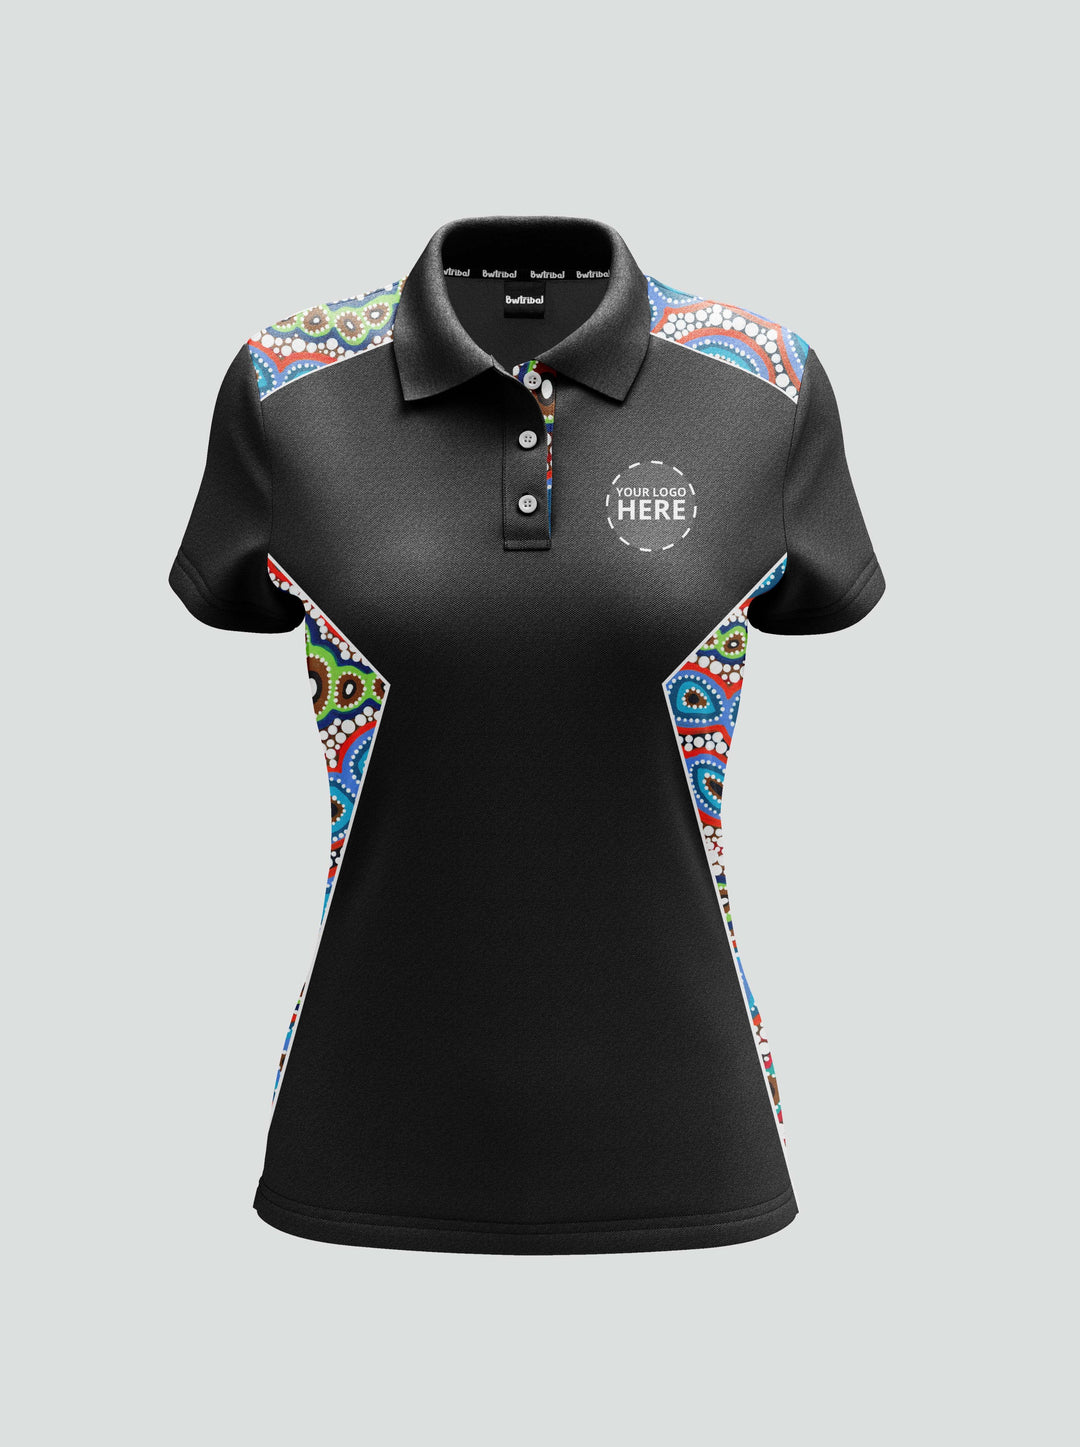 Contours of Country - Women's Corporate Polo